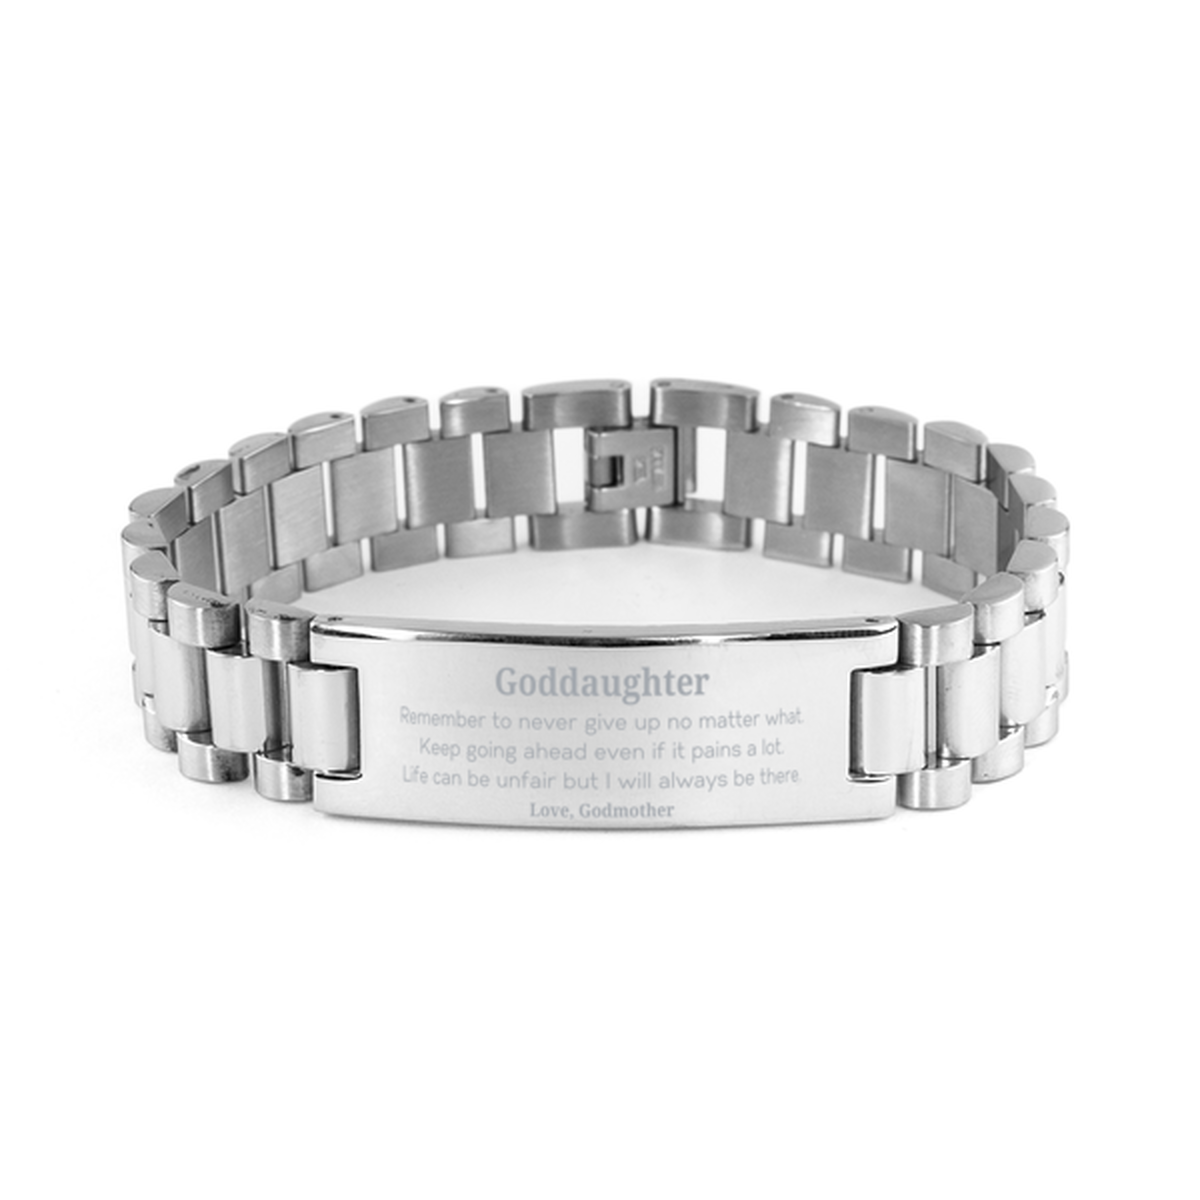 Goddaughter Motivational Gifts from Godmother, Remember to never give up no matter what, Inspirational Birthday Ladder Stainless Steel Bracelet for Goddaughter